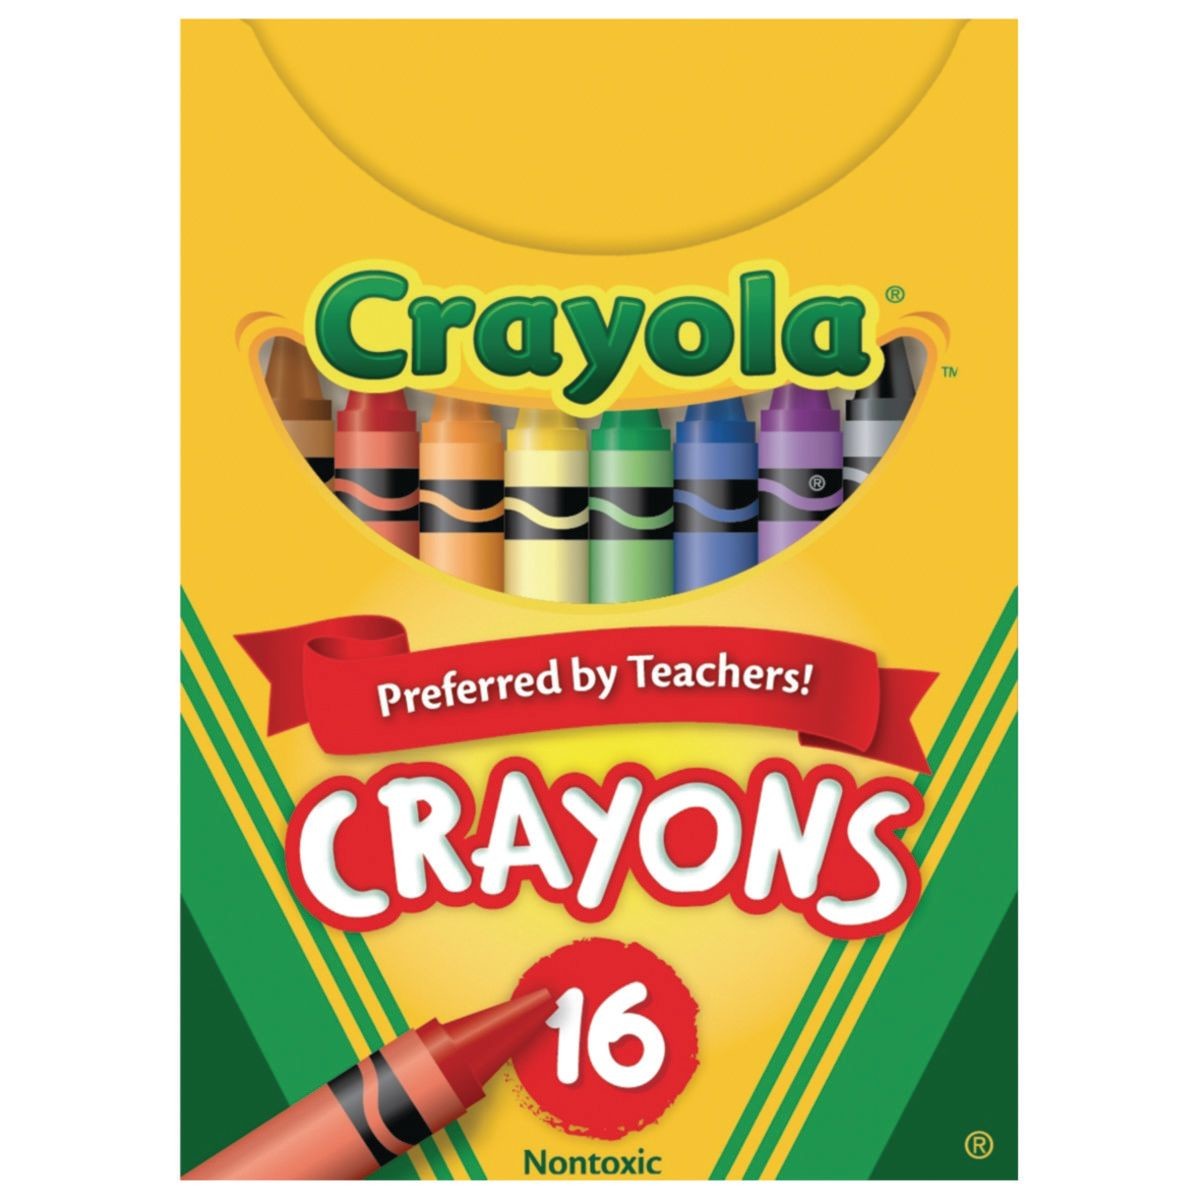 S&S Worldwide Color Splash! Chubby Crayons. Easy To Grip Chunky Crayons For  Kids & Seniors, Divided Box For Sorting, 12 ea of 8 Bright Colors, 2-3/8L